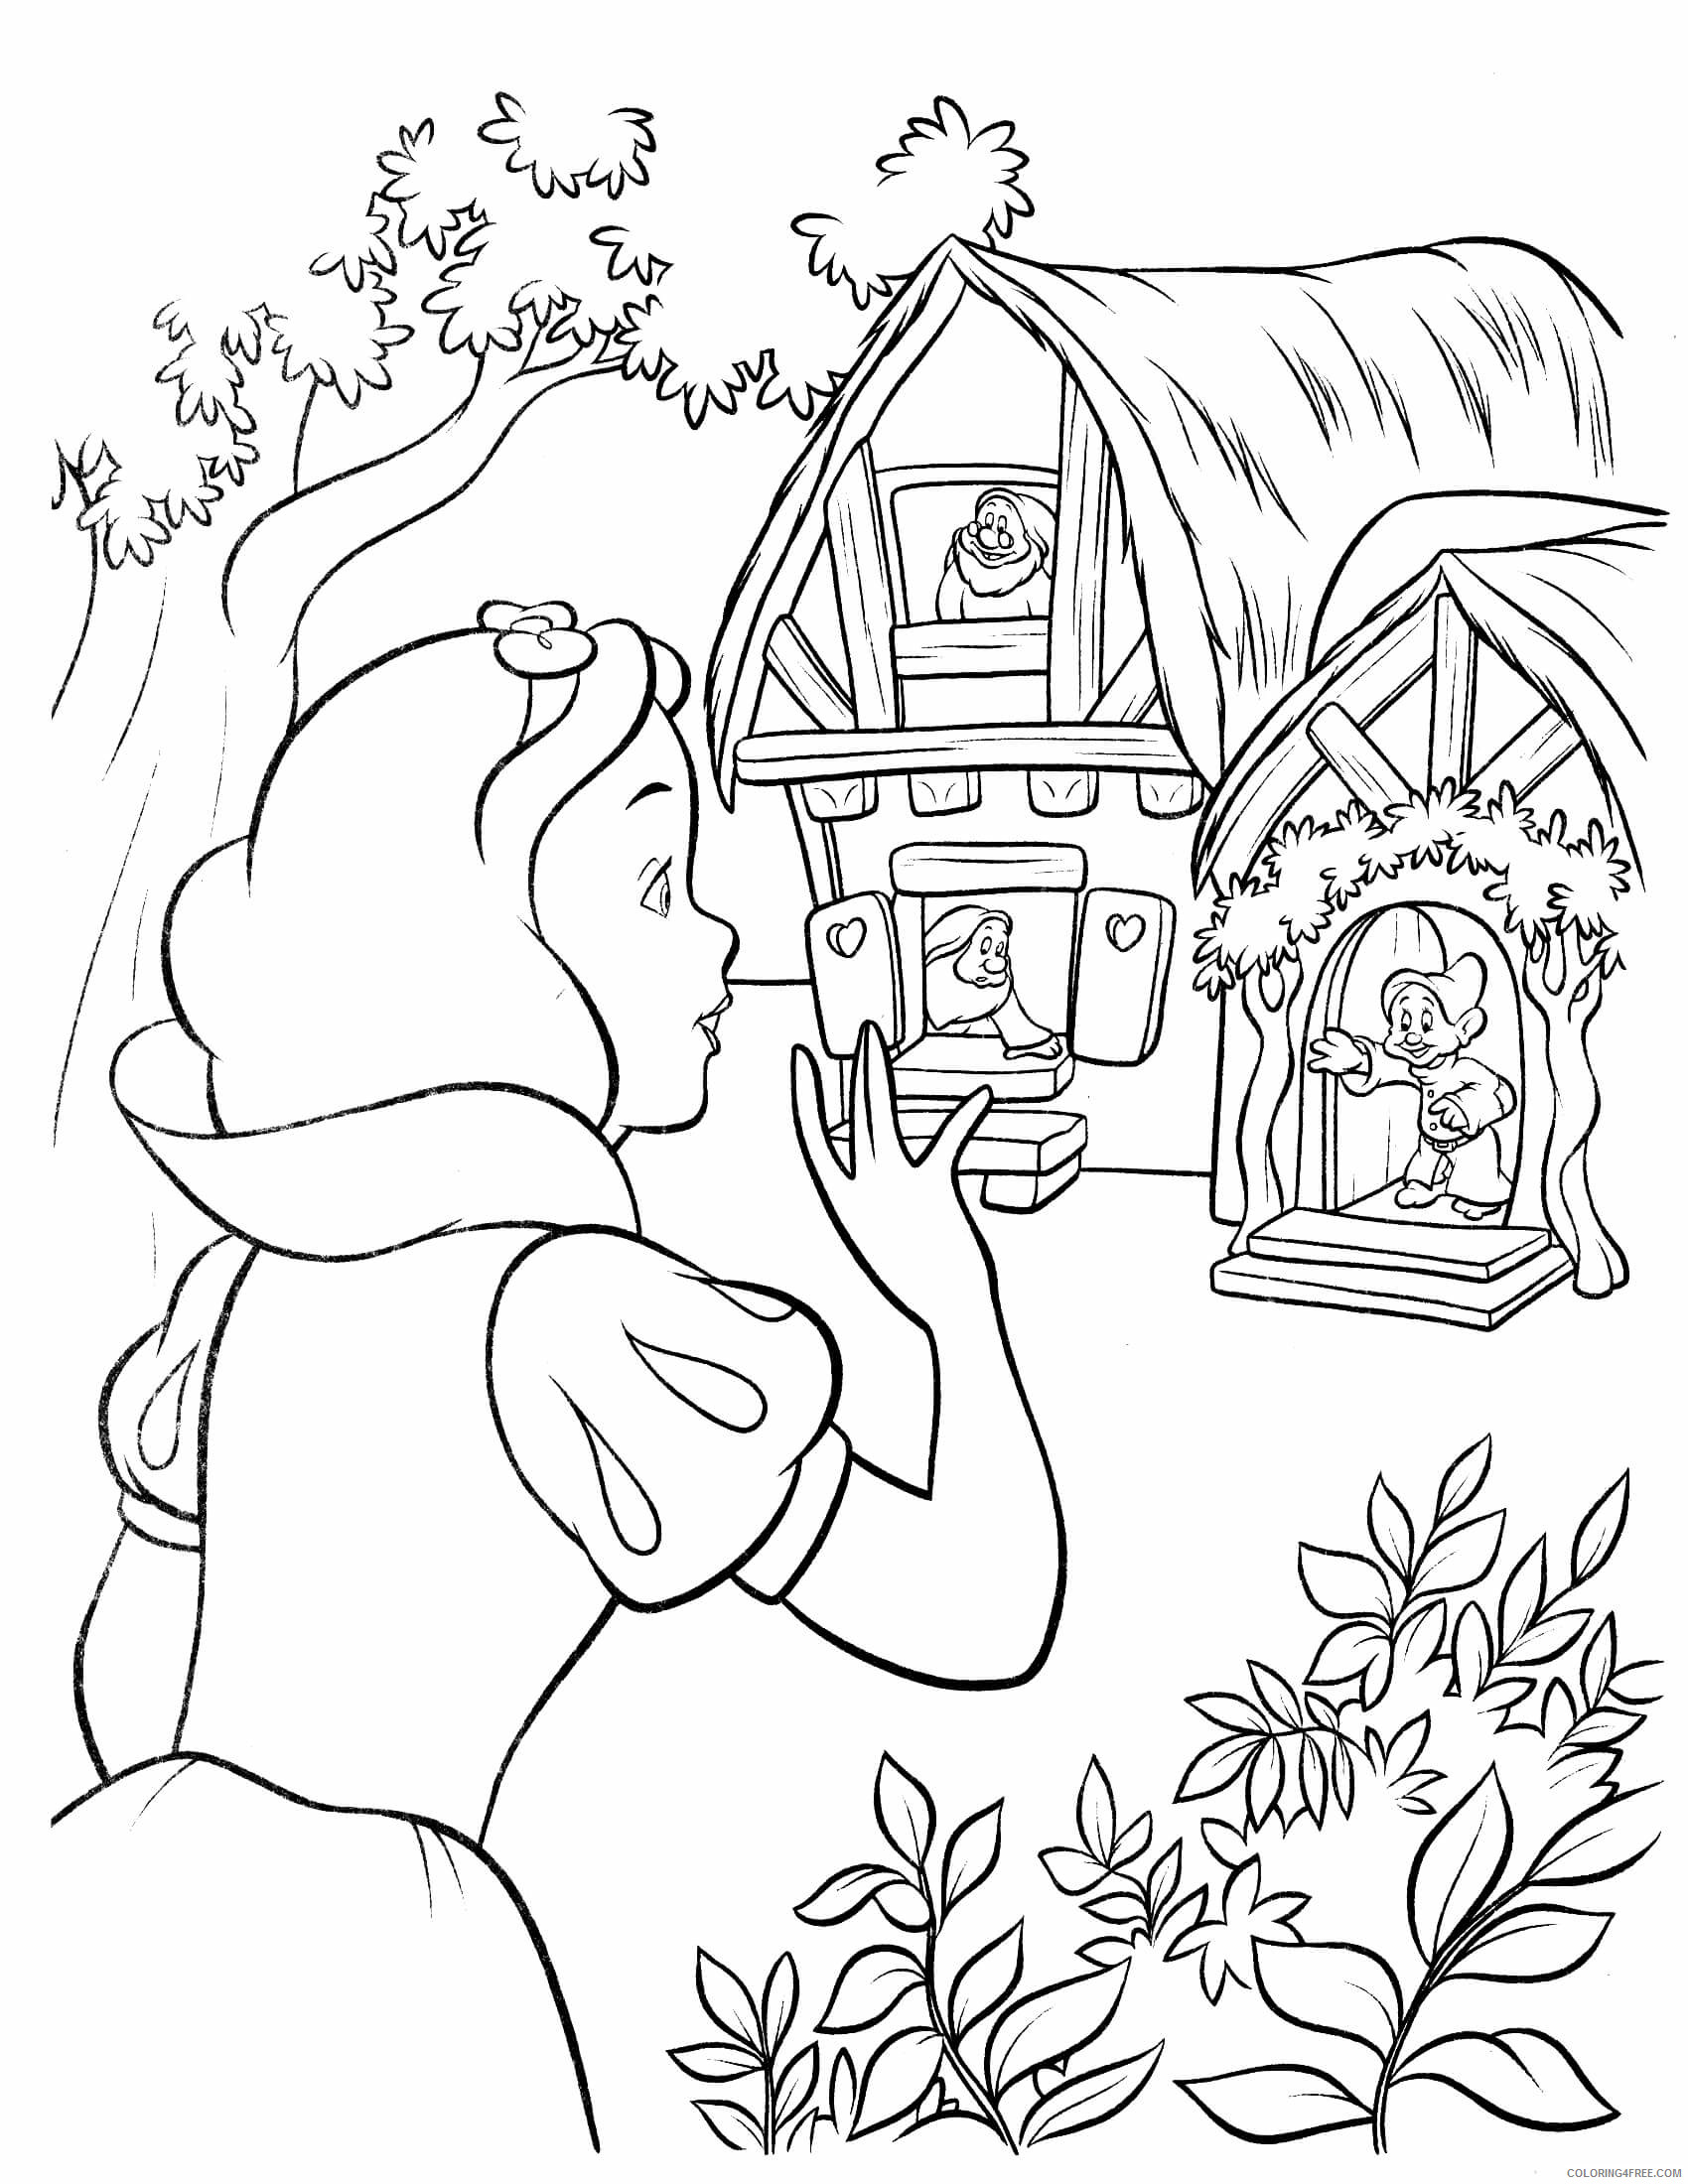 Snow White Coloring Pages Cartoons Snow White Printable 2020 5772 Coloring4free